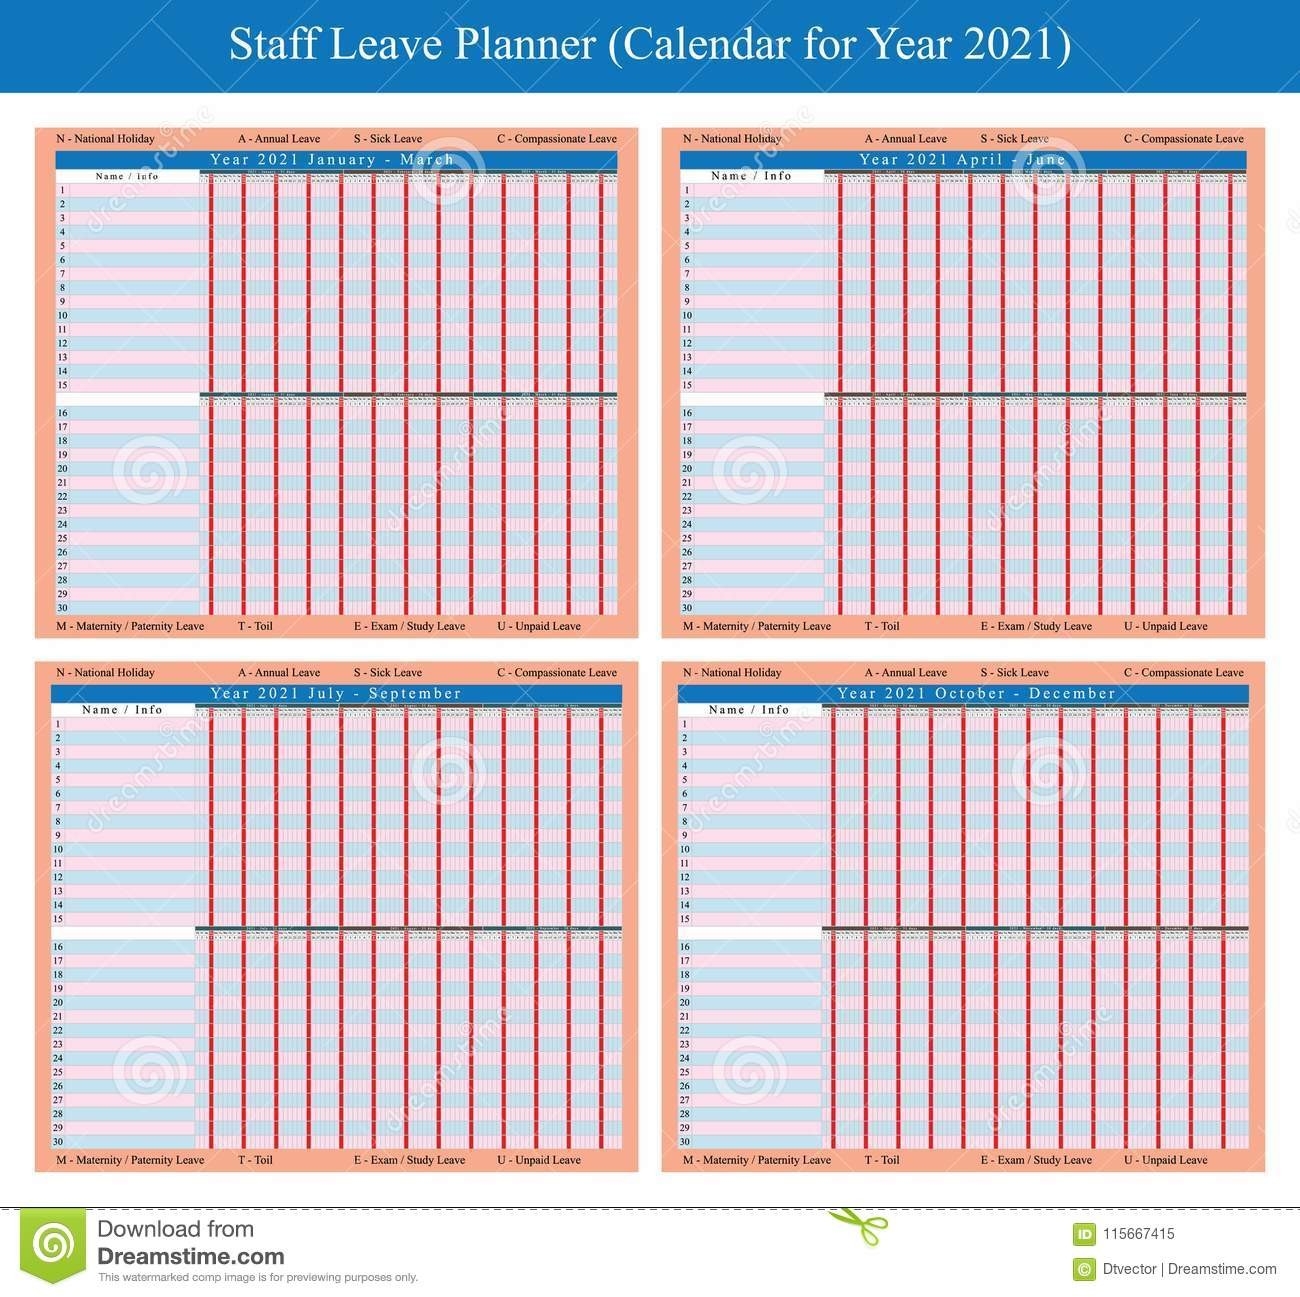 Staff Holiday Planner 2021 Stock Vector. Illustration Of-2021 Calendar For Staff Vacation